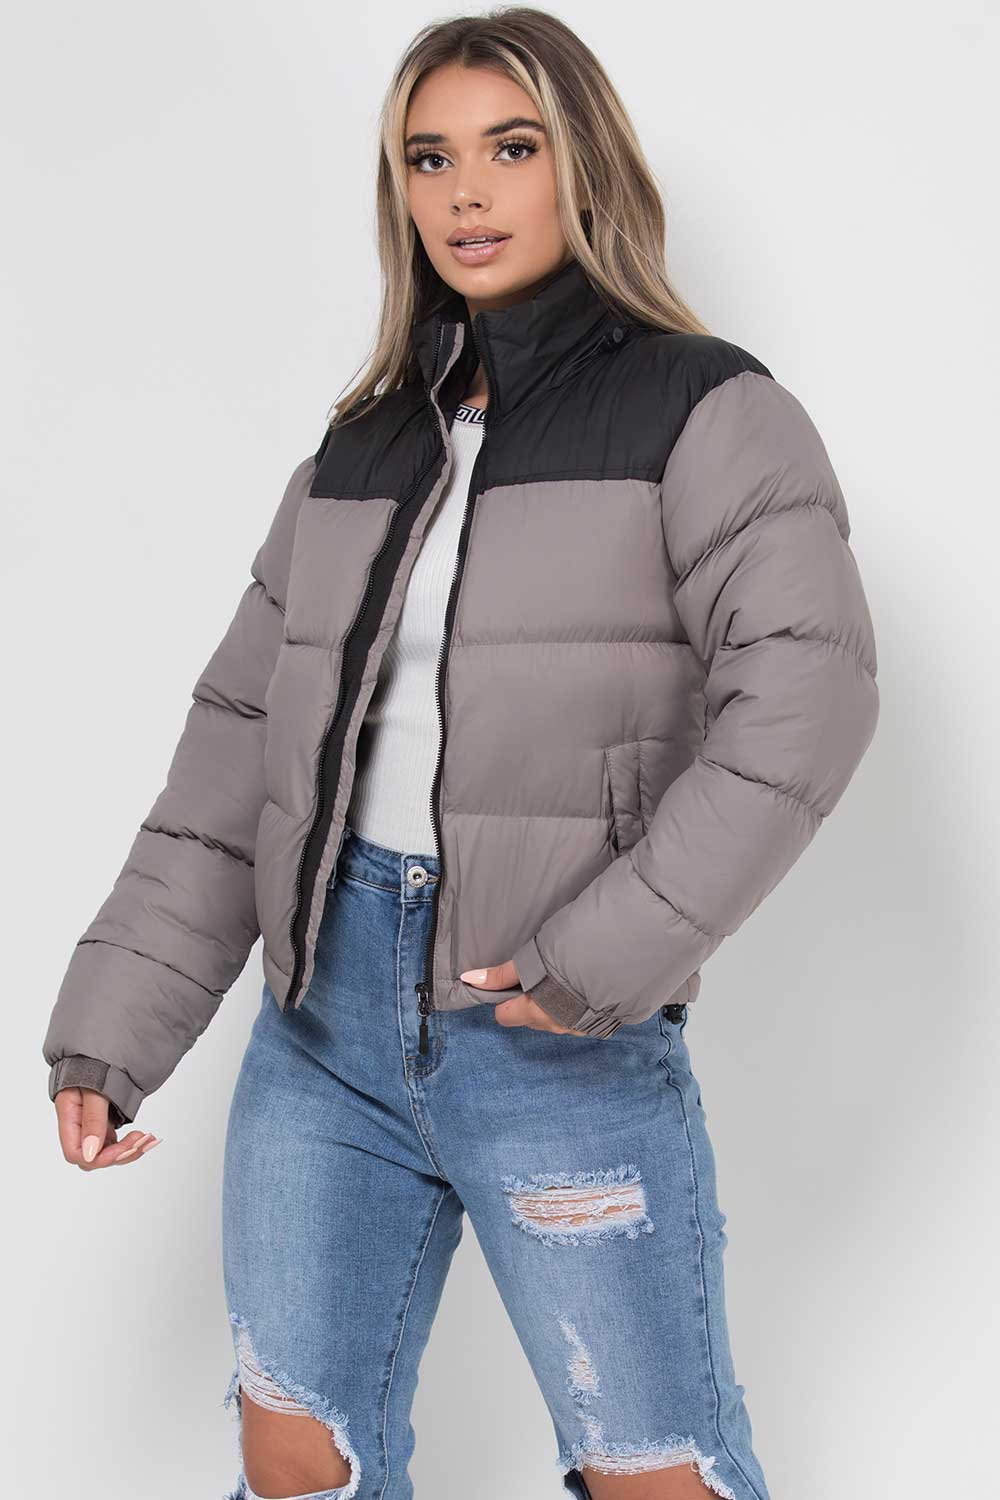 grey puffer jacket north face inspired